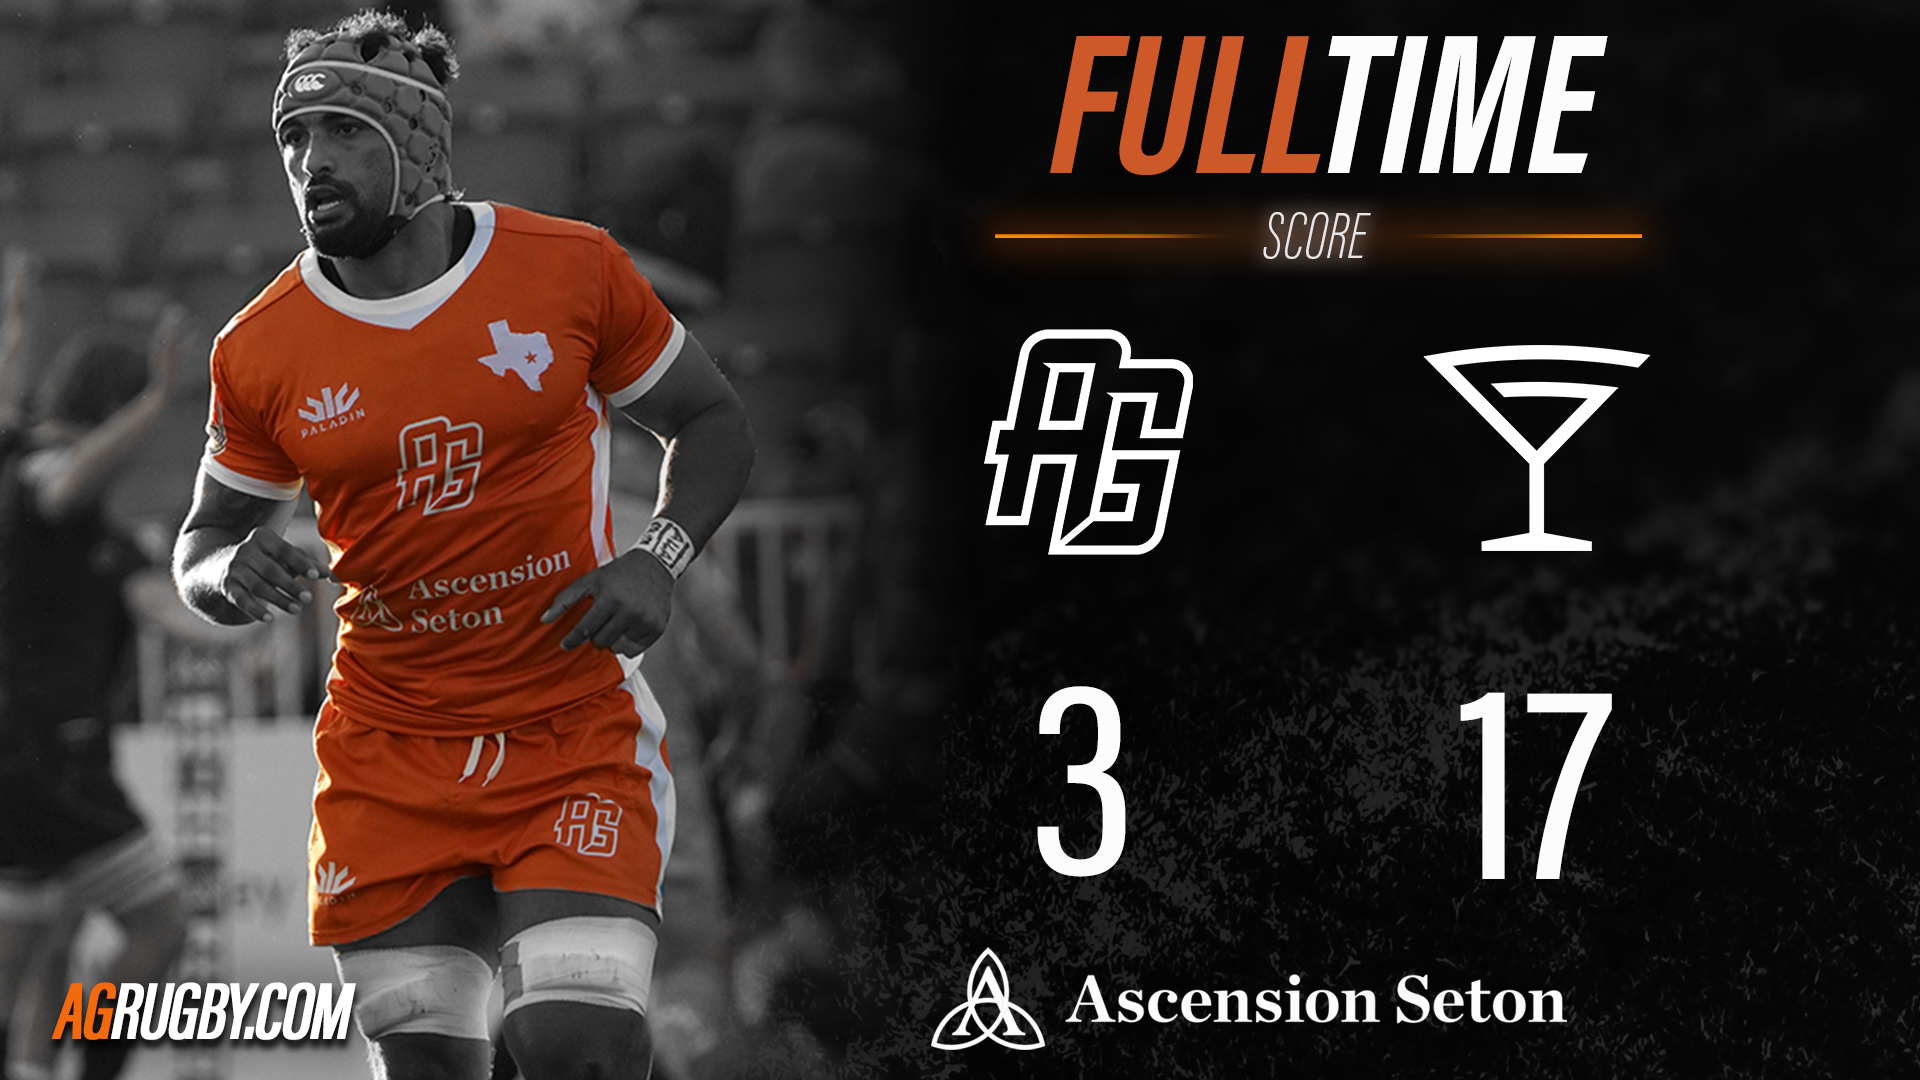 AG Falls To LA In Gritty Rivalry Match